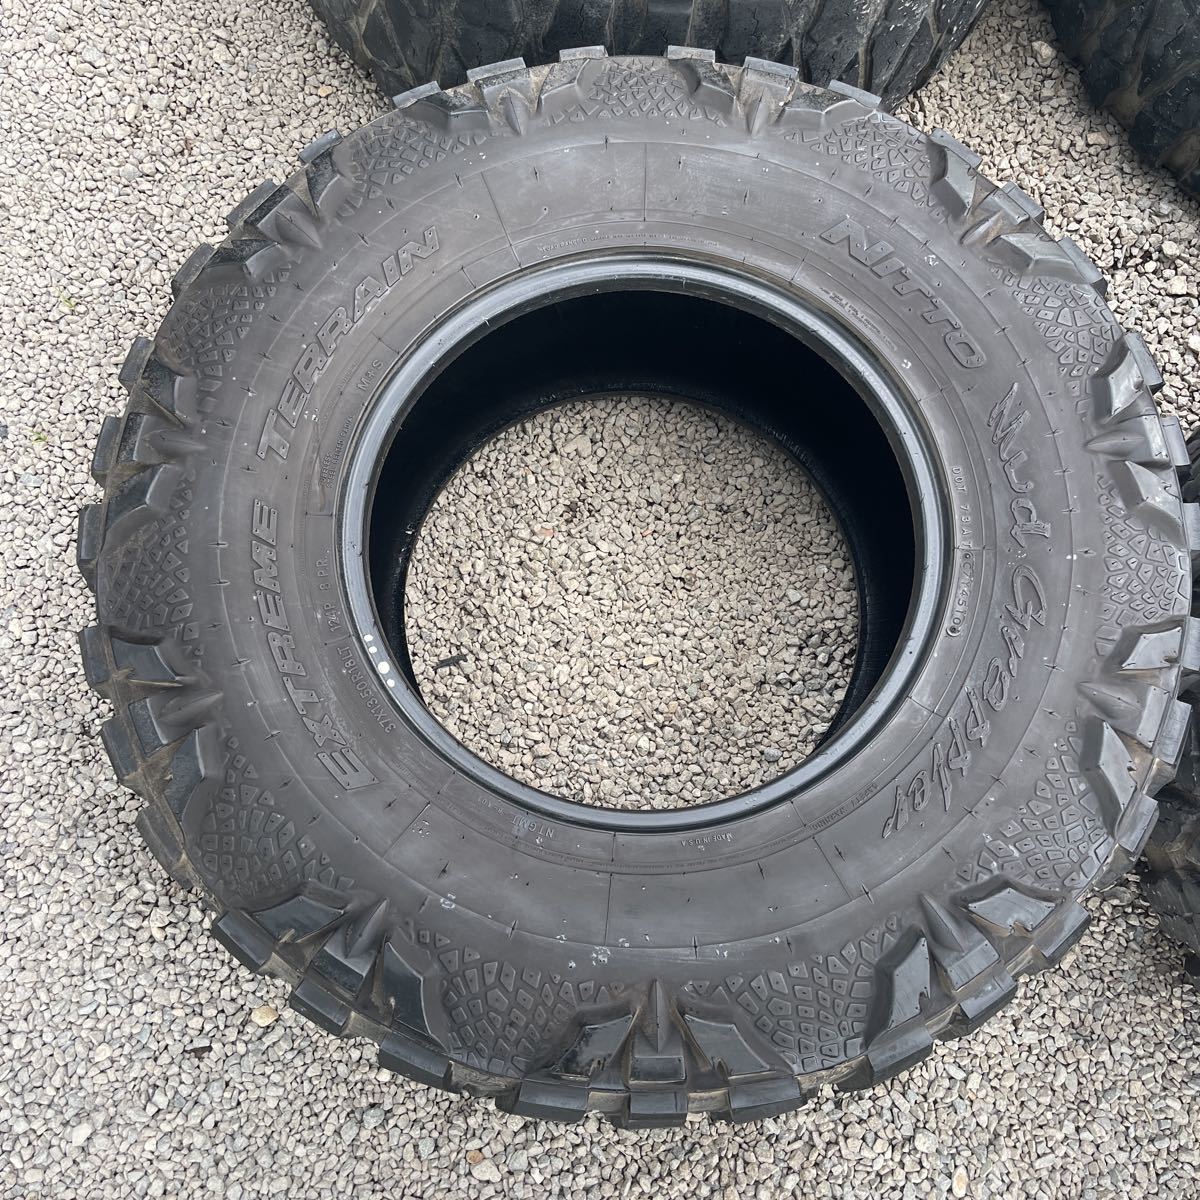 NITTO 37X13.50R18LT selling out EXTREME TERRAIN mud tire MT Wrangler 